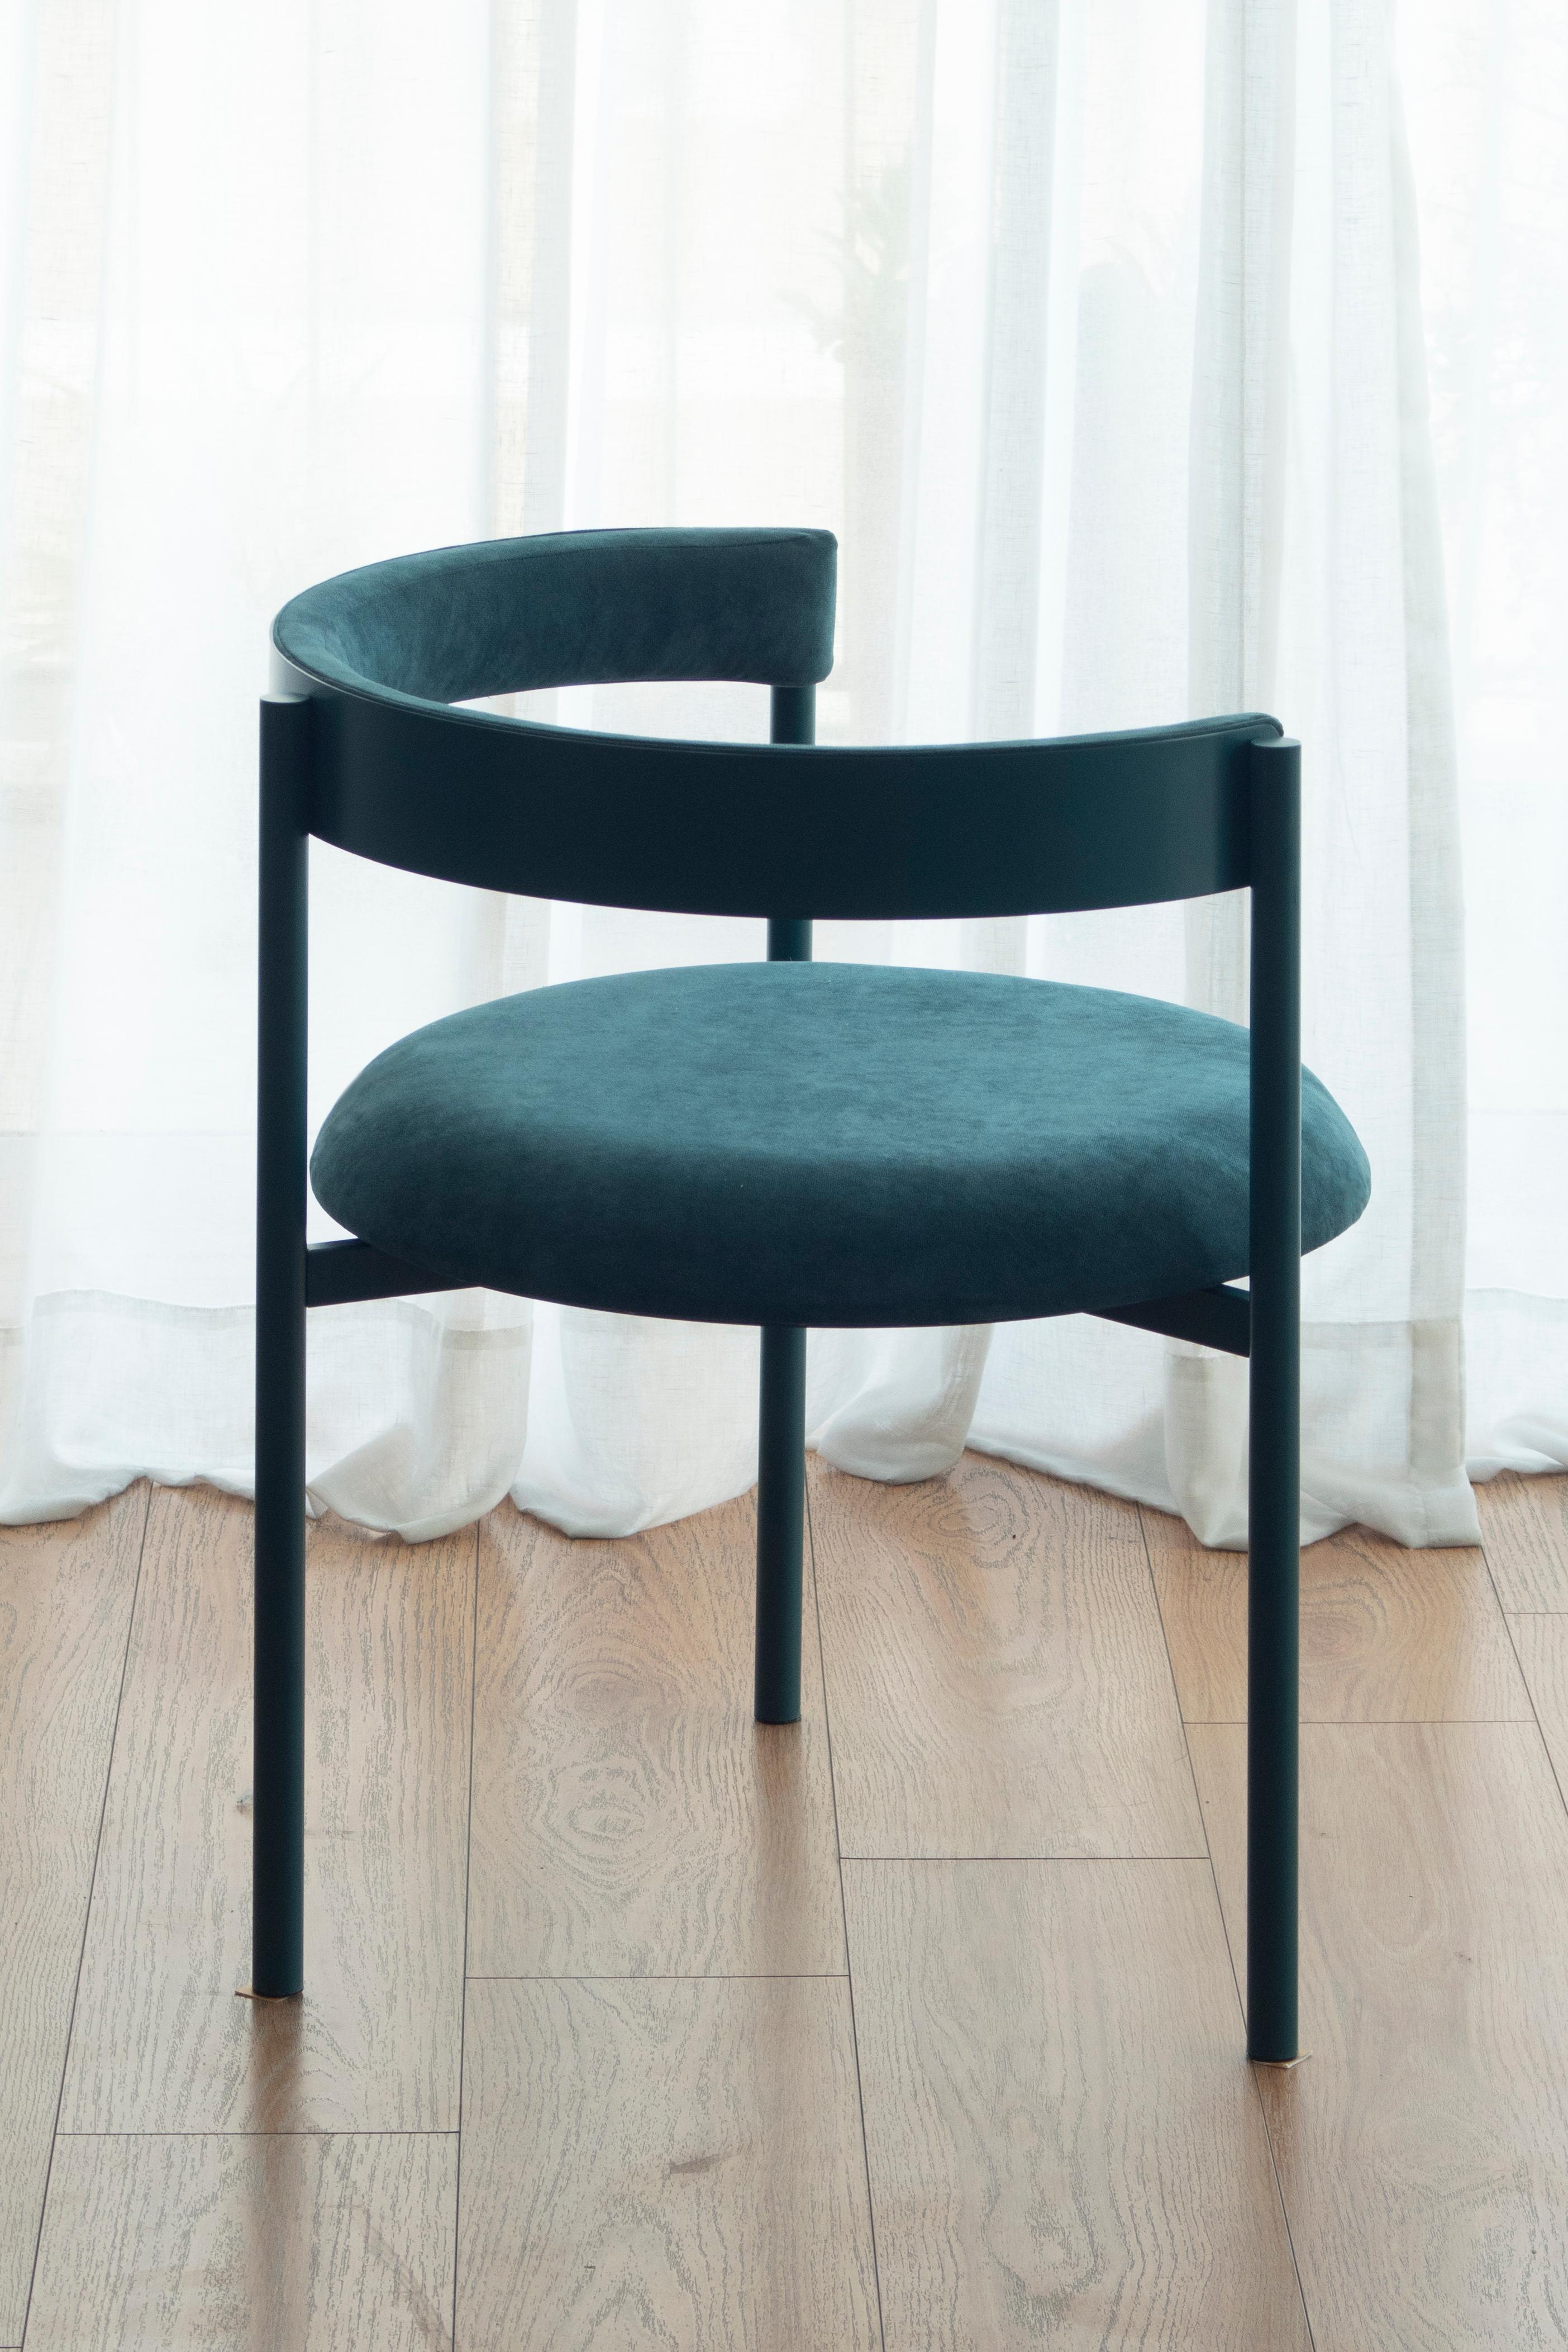 Aro chair, oceano by Ries
Dimensions: W60 x D60 x H67,5 cm 
Materials:Round steel tube, high-density foam, and velvet upholstery.

Also available: Merlot, black, yellow, mika, pink, and dark blue.

Ries is a design studio based in Buenos